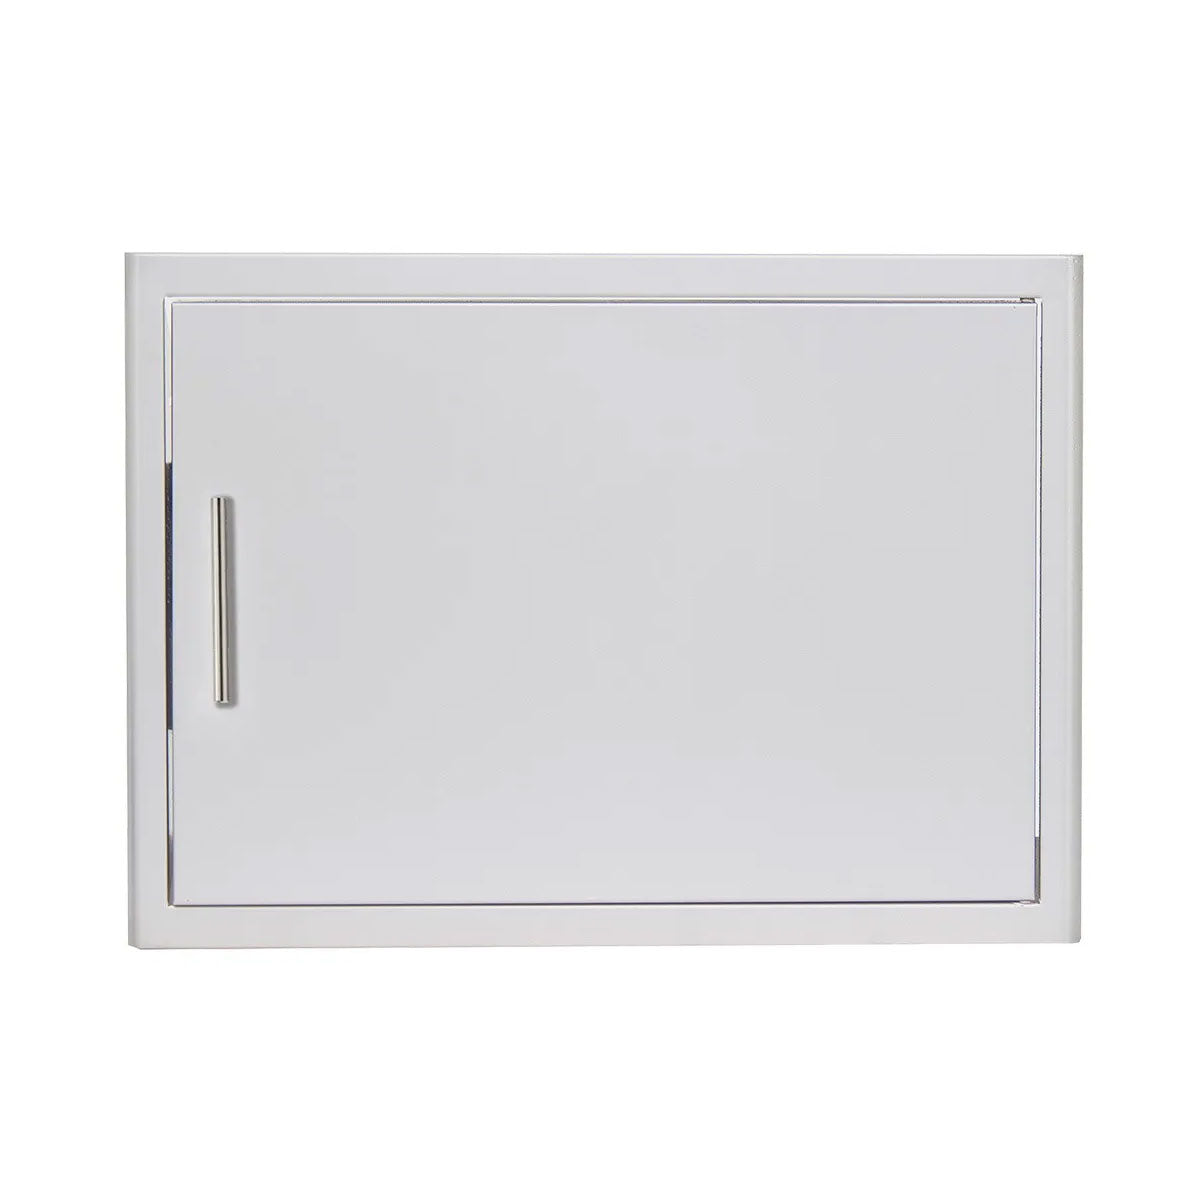 28" Single Access Right-Hinged Door with Soft Close Hinges - BLZ-SH-2417-R-SC